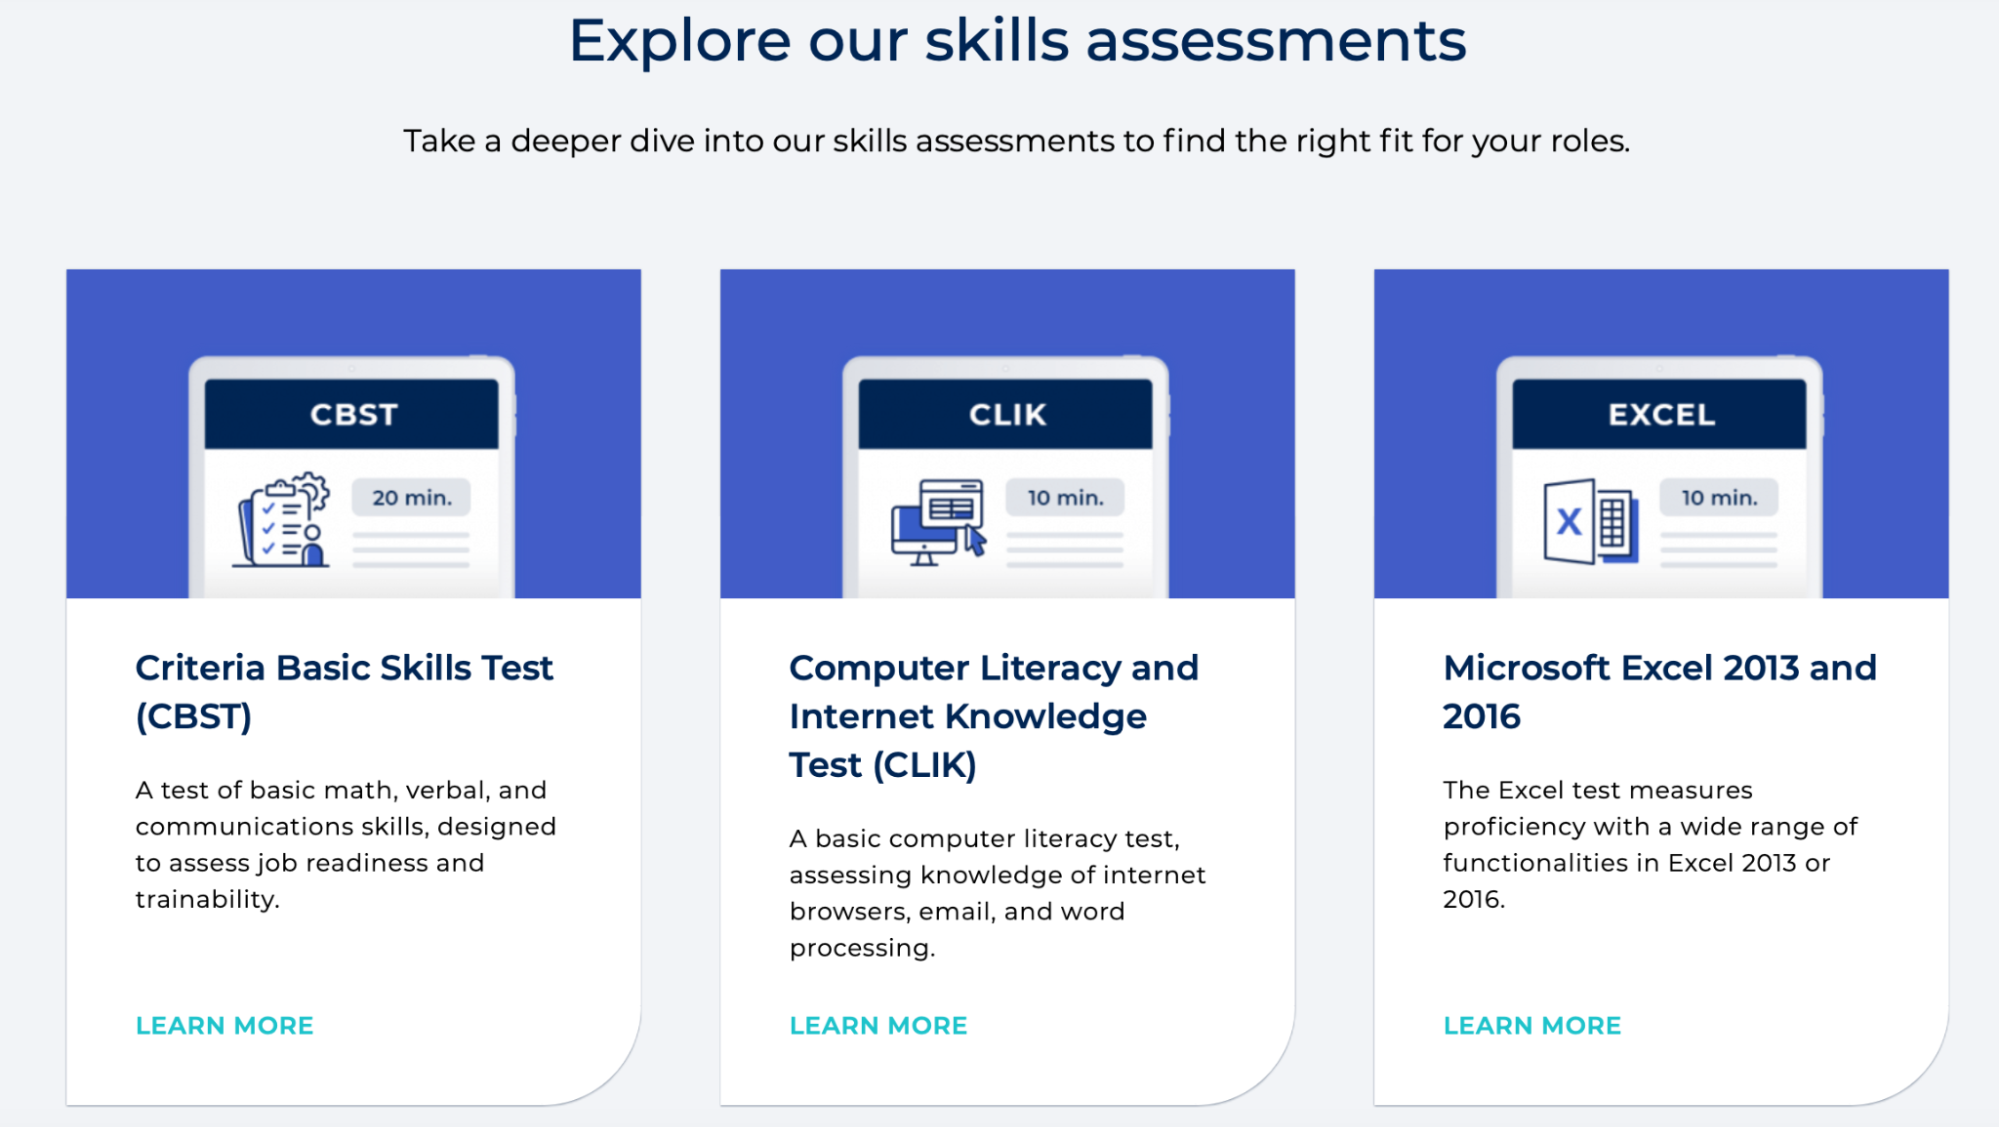 Criteria explore our skills assessments page.